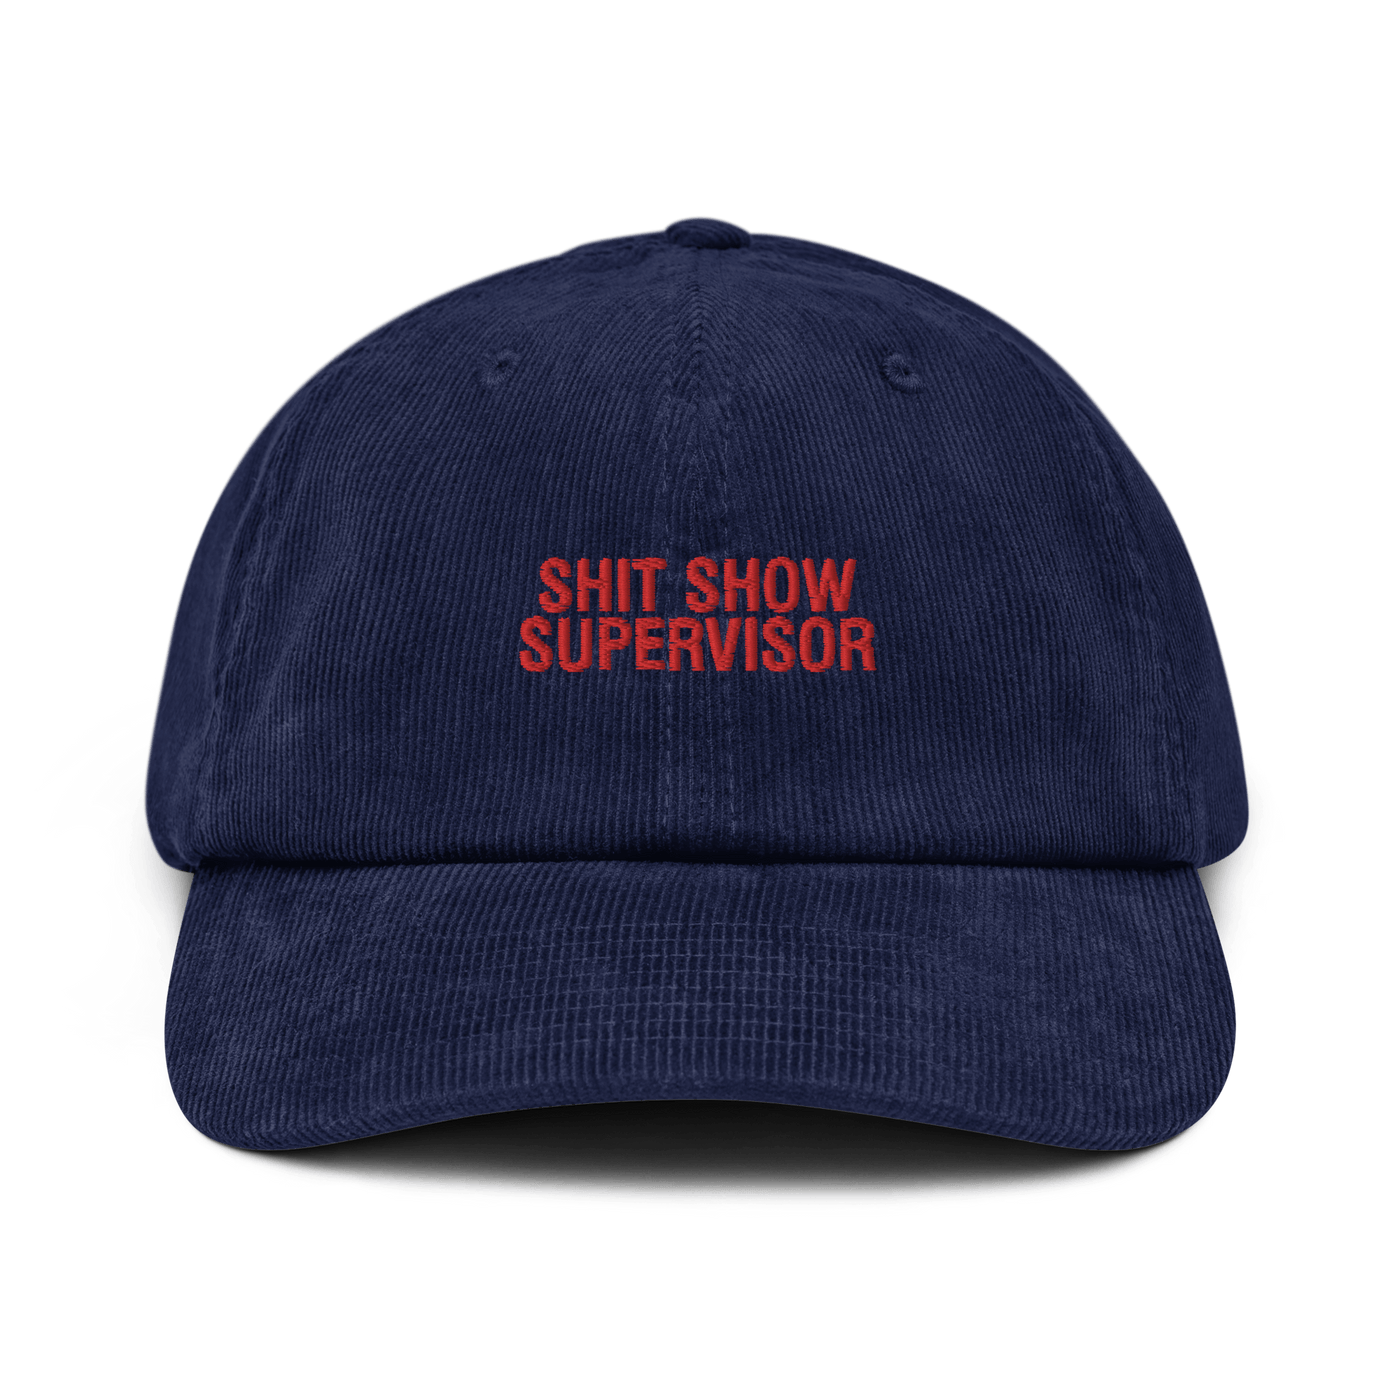 Shit Show Supervisor Corduroy hat - Oxford Navy - Just Another Cap Store